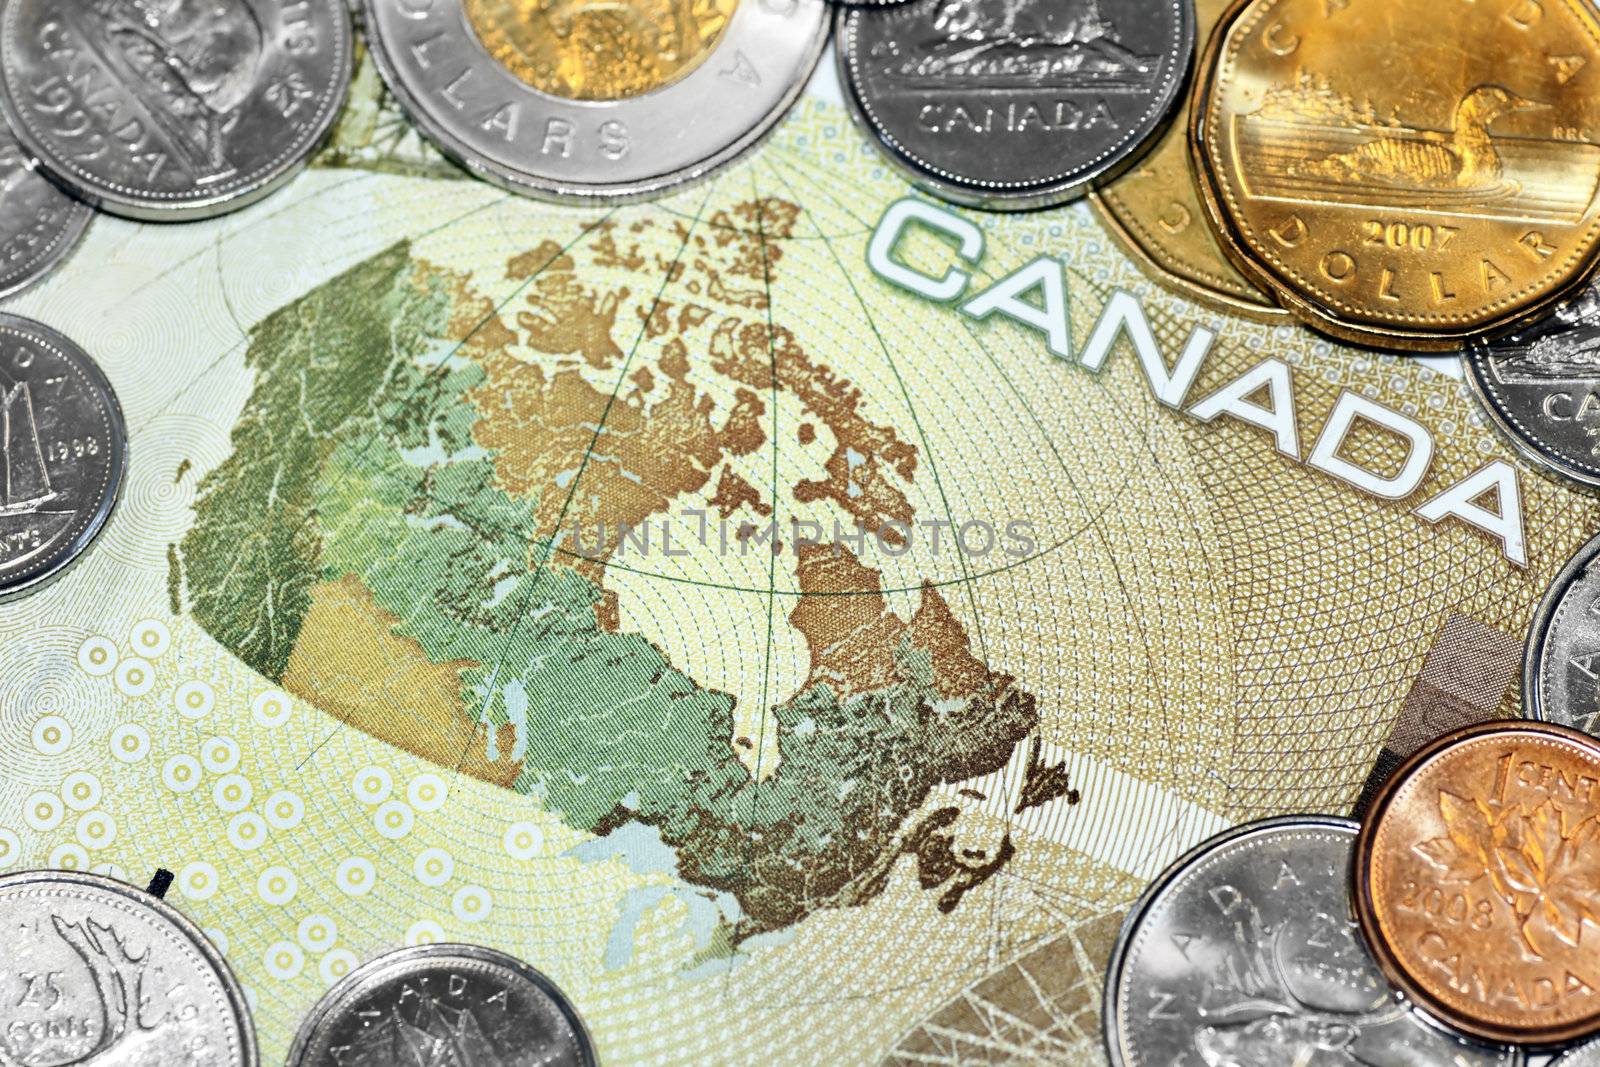 Close up of a one hundred canadian dollar bill showing the map of Canada, surrounded by loony and tuney coins.